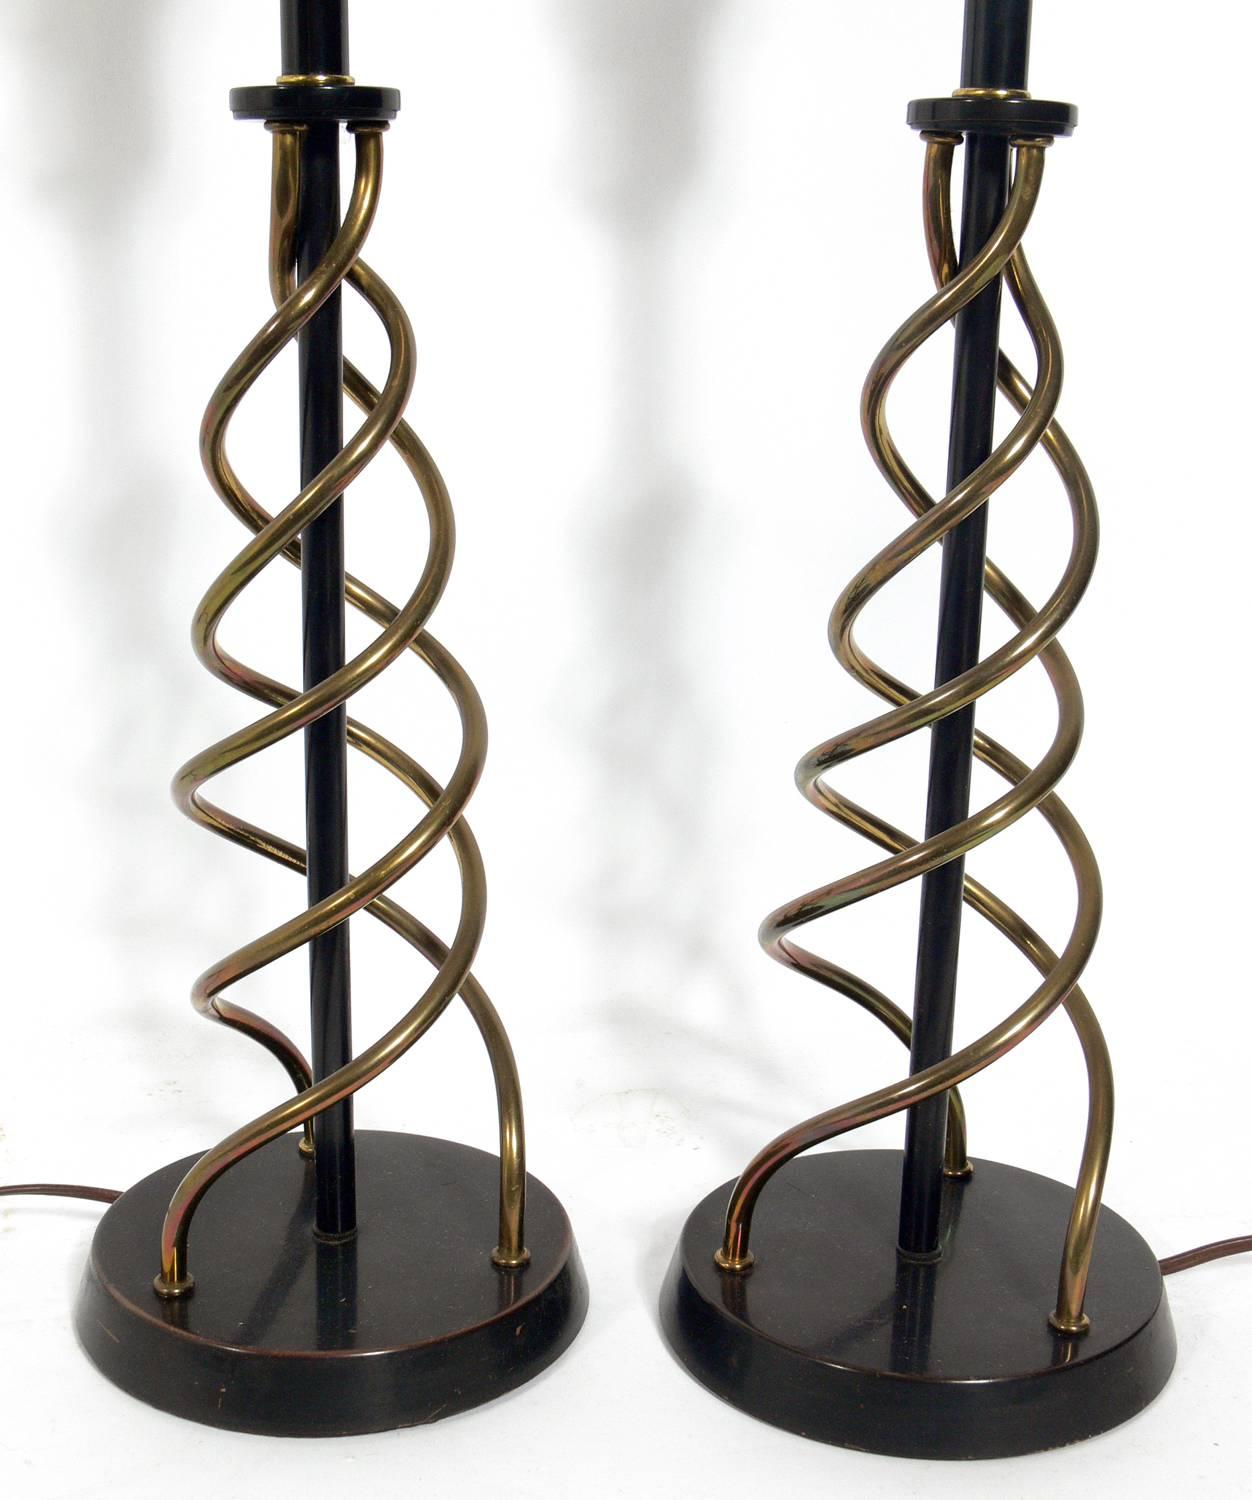 Pair of sculptural brass spiral lamps, American, circa 1950s. Constructed of patinated brass spirals with deep bronze color metal bases and fittings. They have been rewired and are ready to use. The price noted below includes the shades.